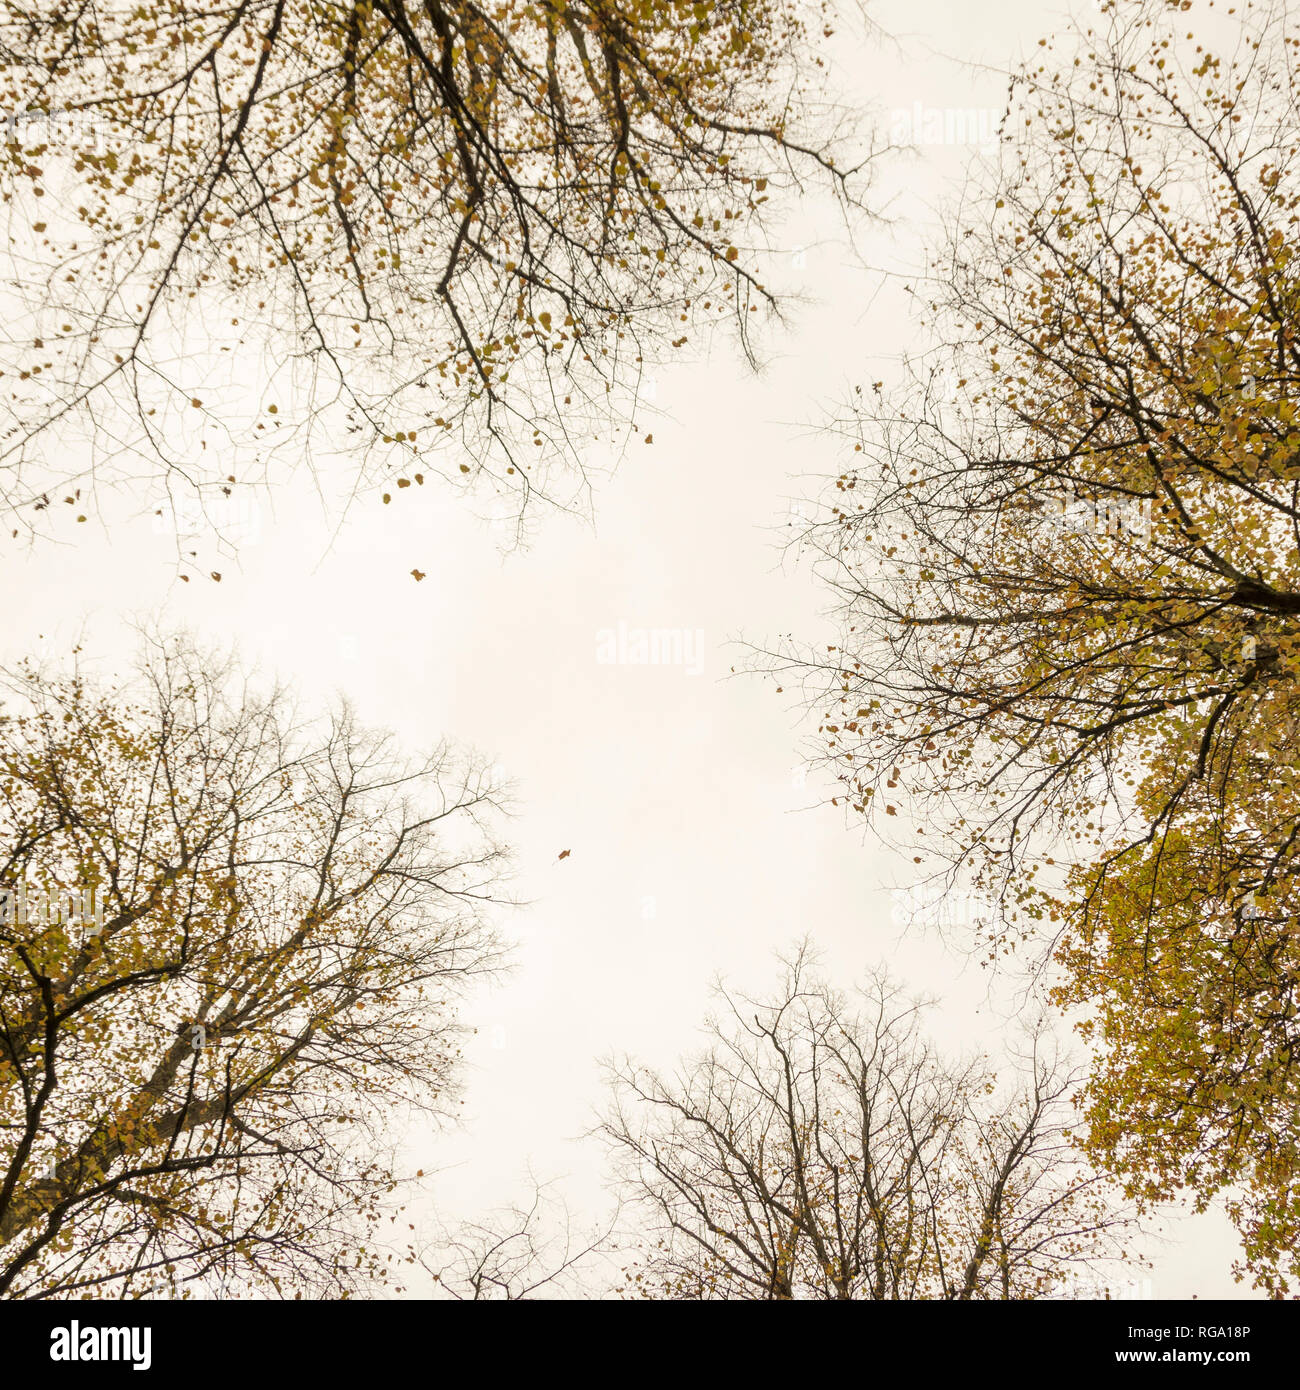 Leaves falling from autumnal trees, looking up at the sky in the gap between four large trees. Stock Photo